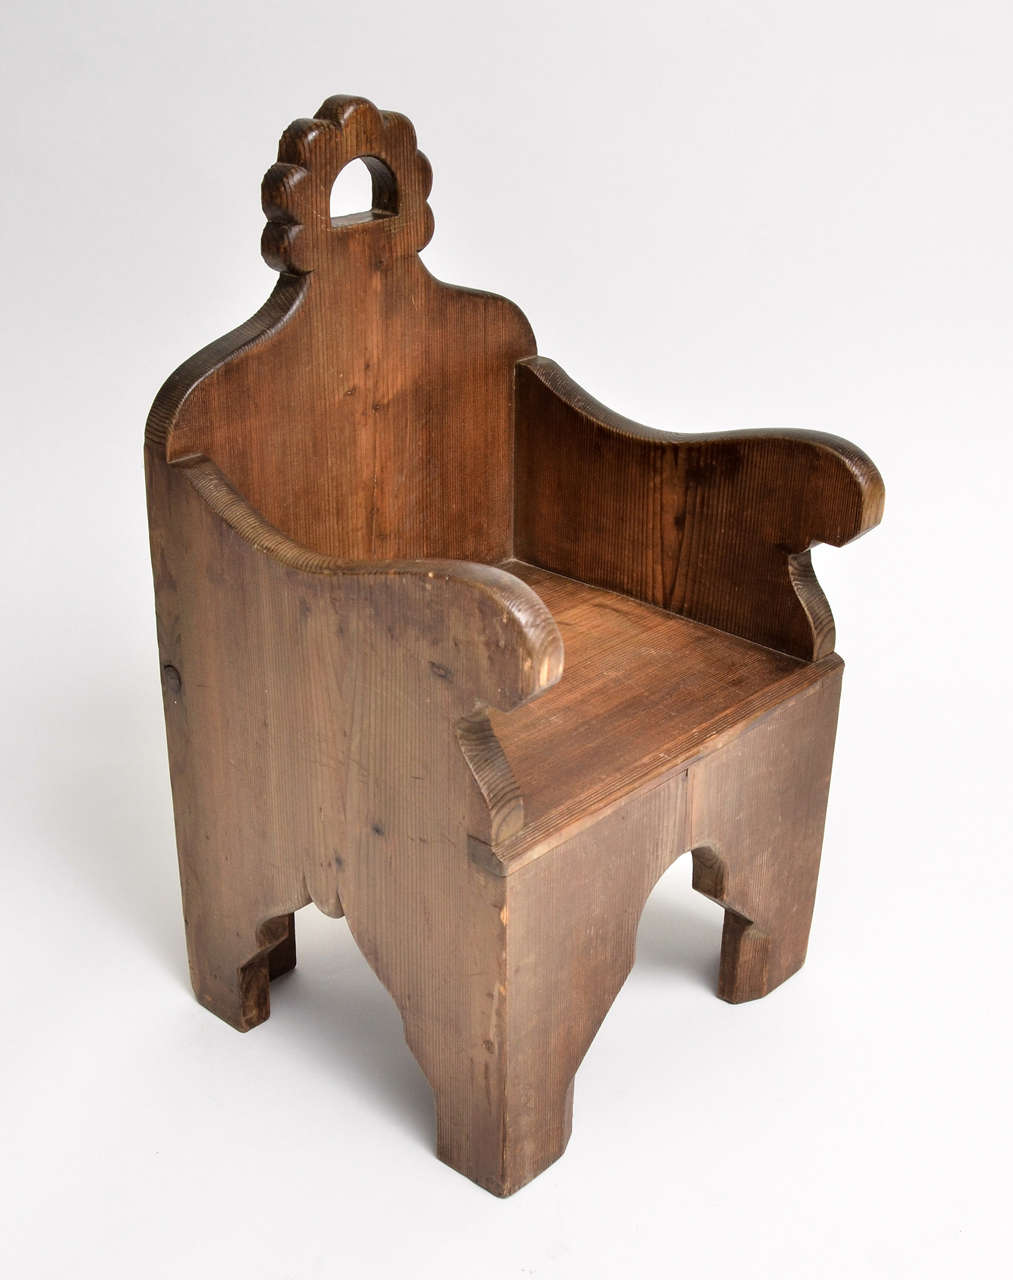 Masterful Pair of Arts & Crafts Armchairs Made for Children.
Sturdy waxed wood with stylized Romanesque Revival ornament:  arched openings-- a pierced cusp Back provides a convenient handle to move each chair.   Unique